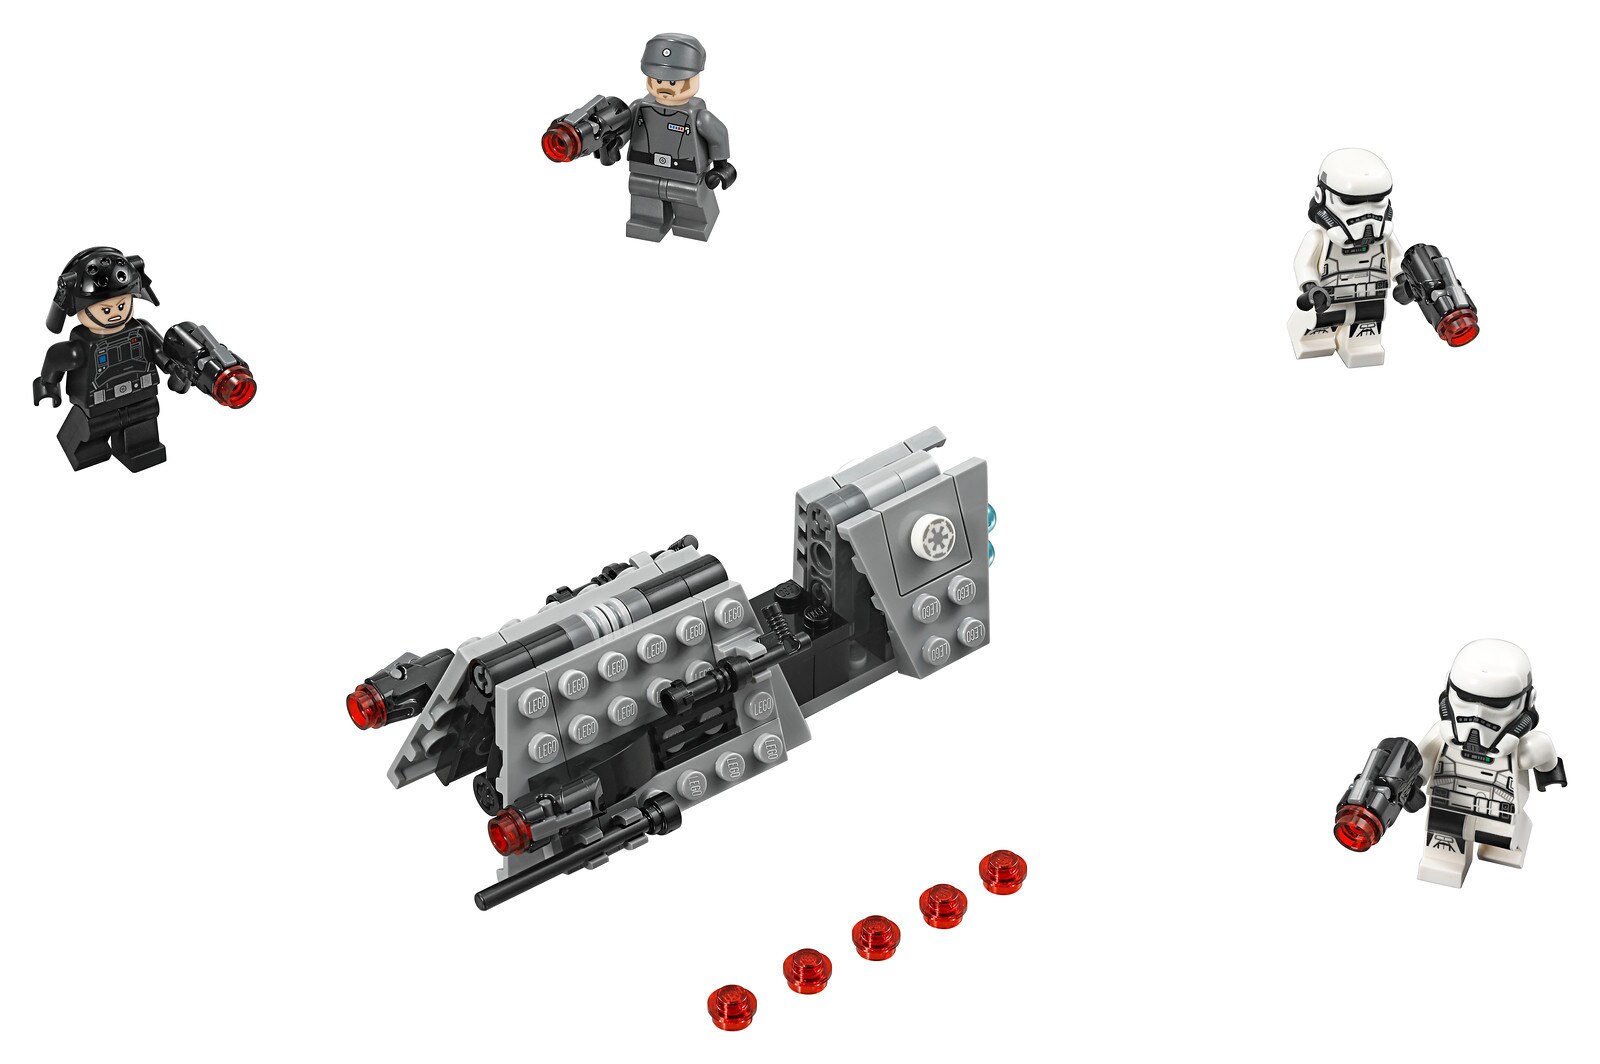 The Lego Star Wars Imperial Patrol Battle Pack featuring an Imperial Emigration and Recruitment Officers, stormtroopers, and a patrol speeder.